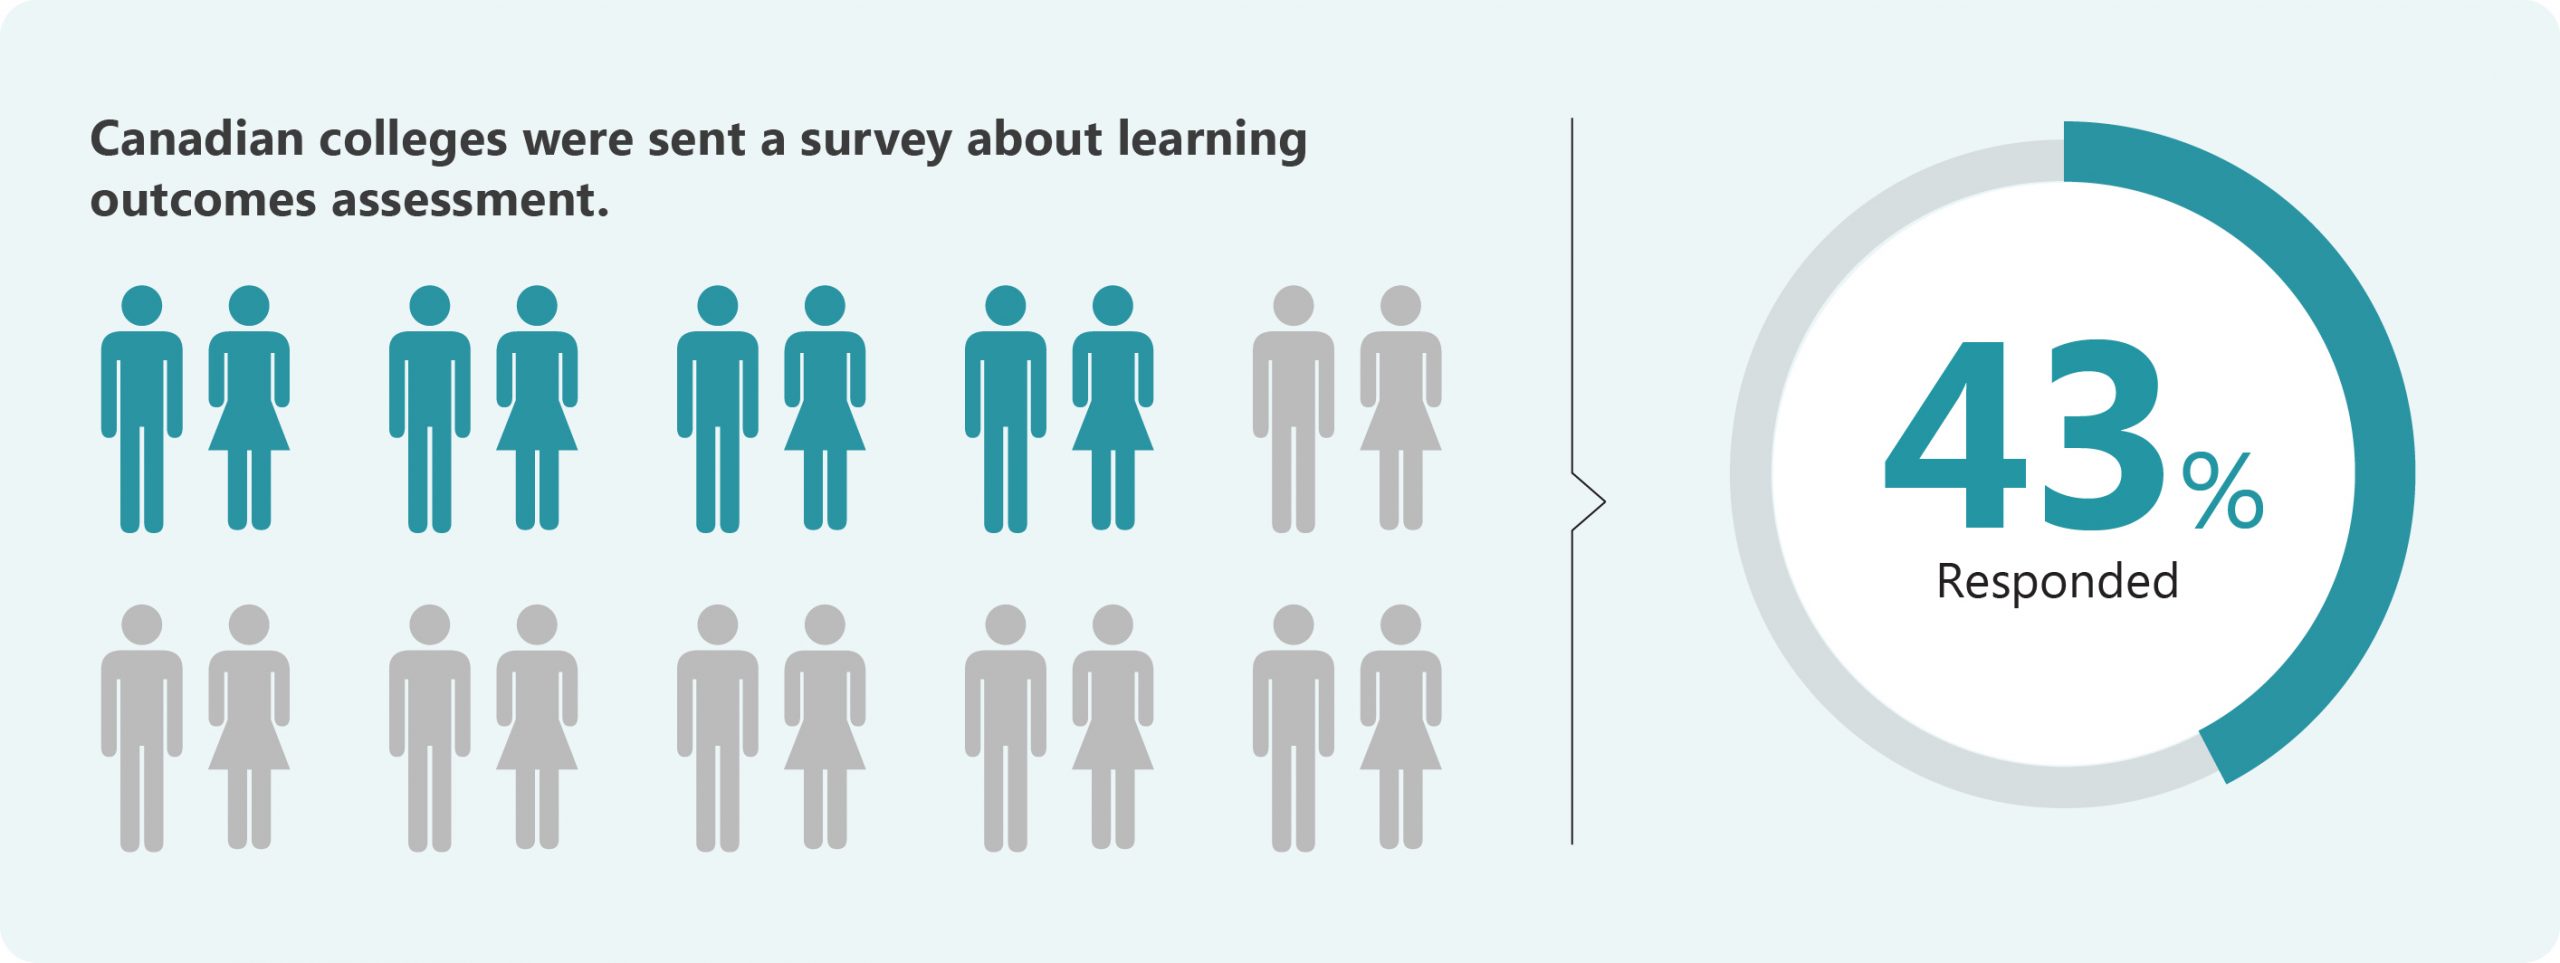 Canadian colleges were sent a survey about learning outcomes assessment - 43% responded.